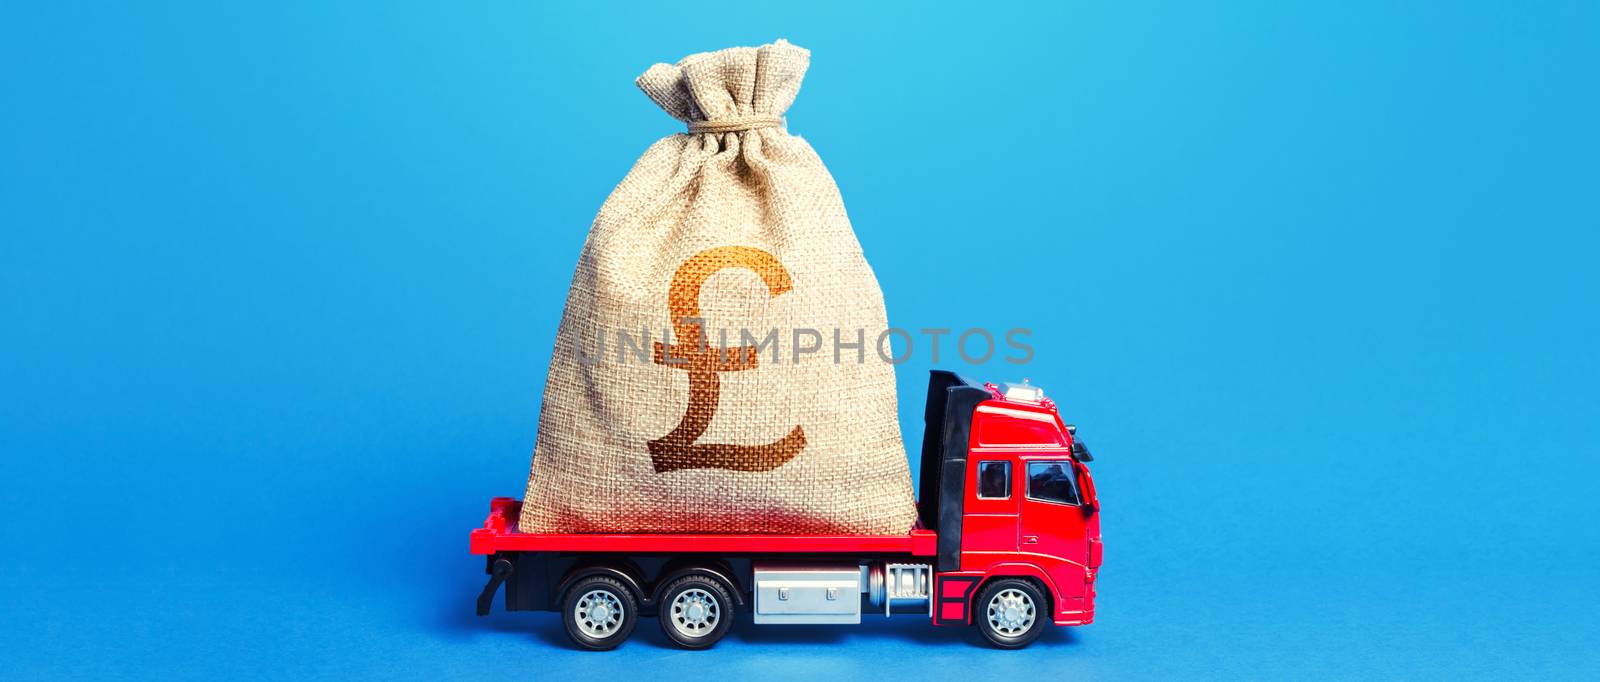 Truck is carrying a huge british pound sterling money bag. Great investment. Anti-crisis measures of government. Attracting large funds to the economy for subsidies, support soft loans for businesses by iLixe48